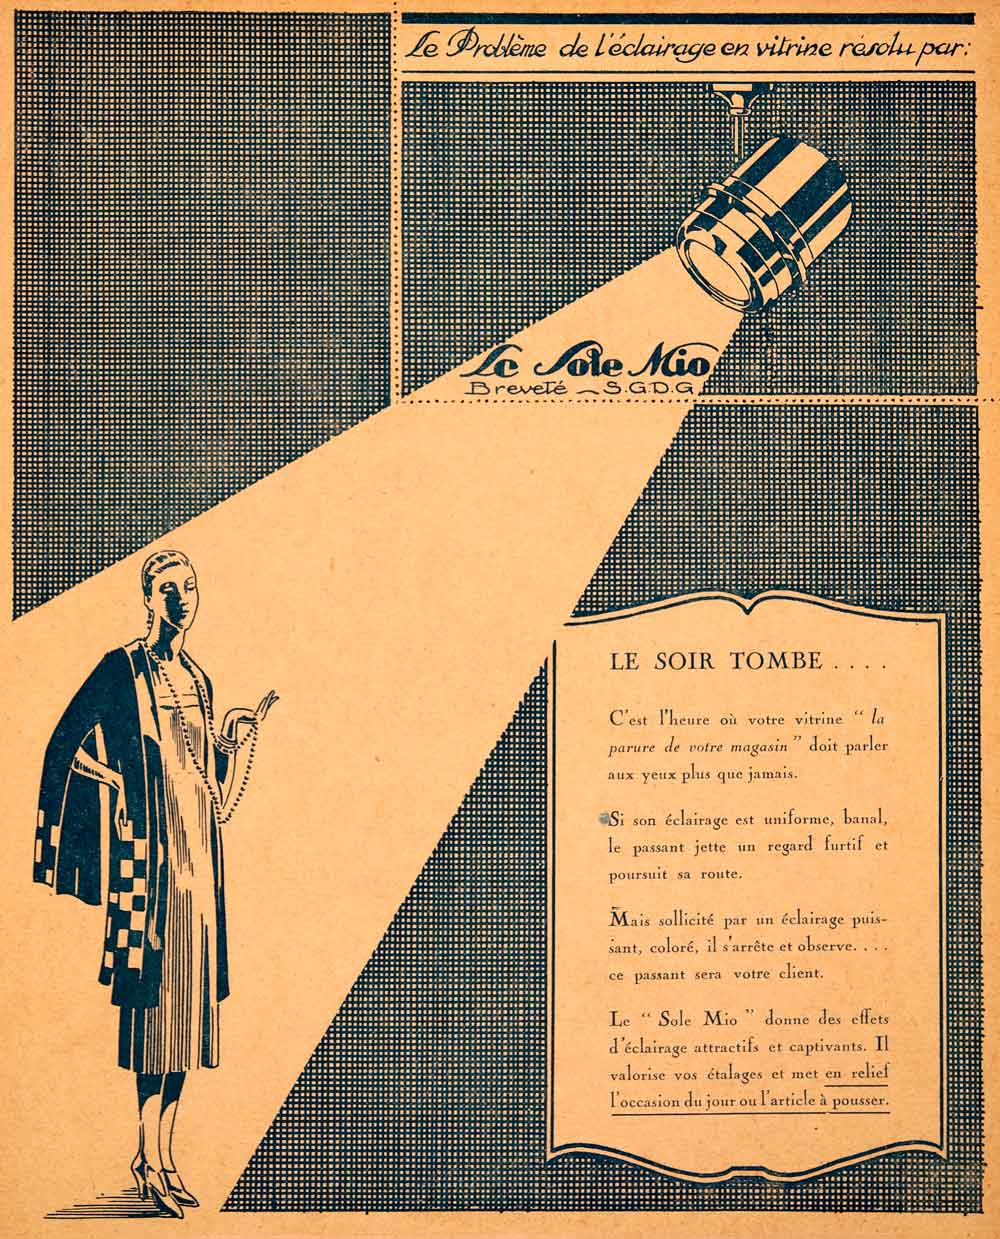 1926 Lithograph Ad Sole Mio Spotlight Advertising Store 16 Rue Roussel VEN4